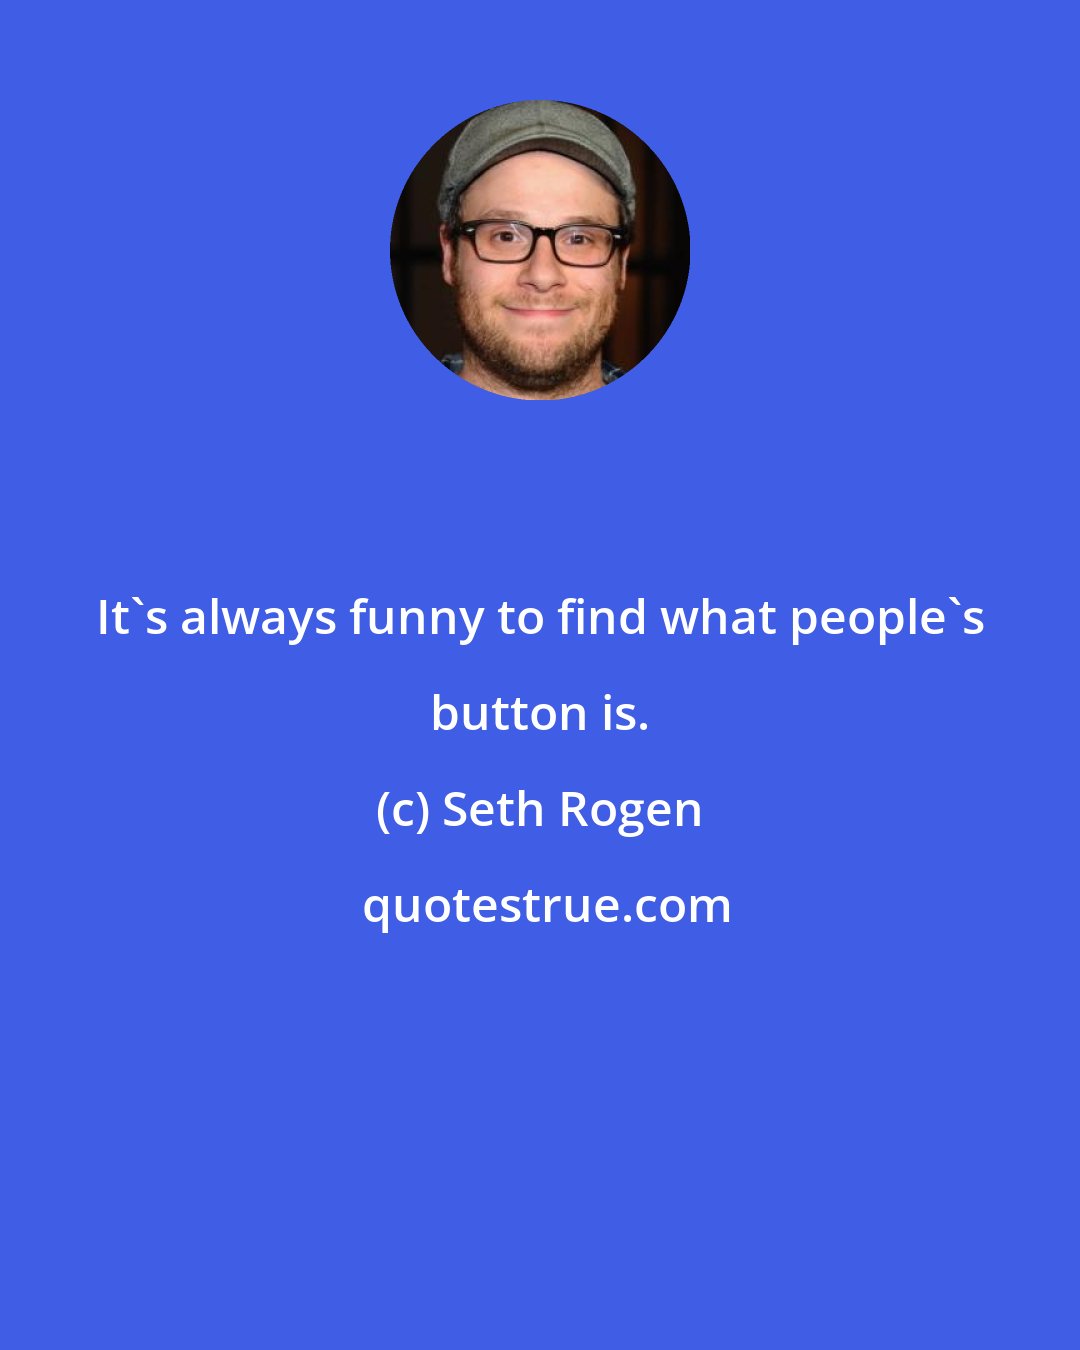 Seth Rogen: It's always funny to find what people's button is.